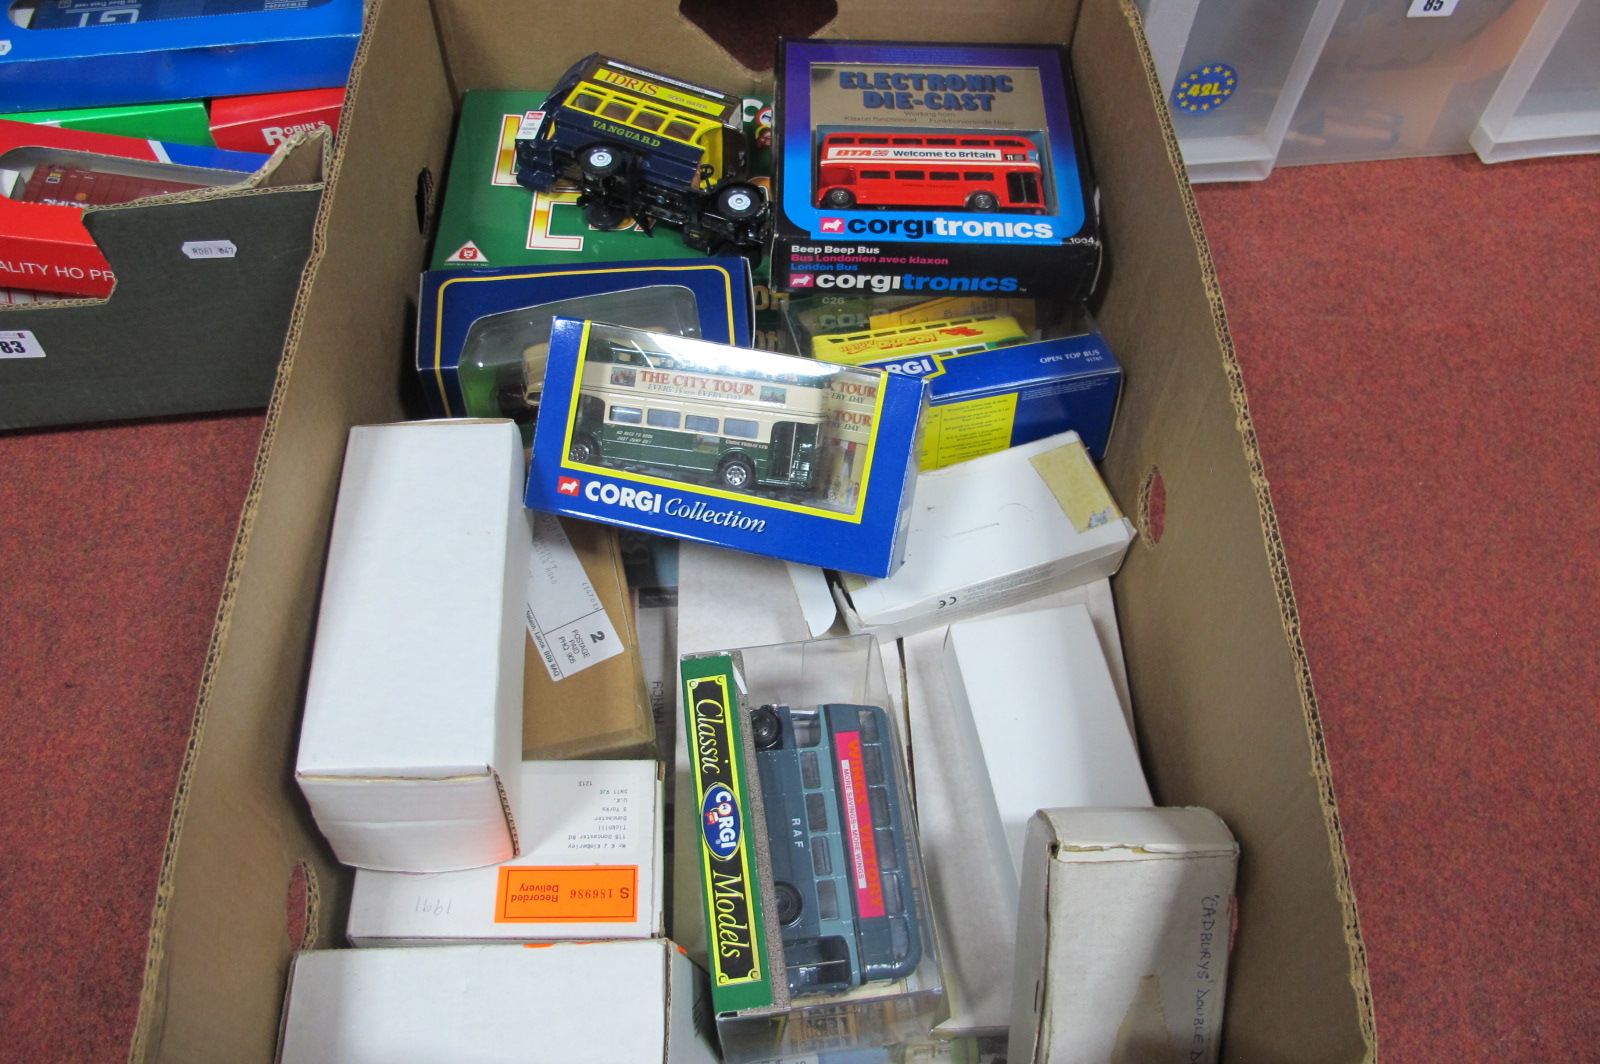 A Quantity of Mainly Corgi Buses and Similar Items, often in Mailaway boxes.